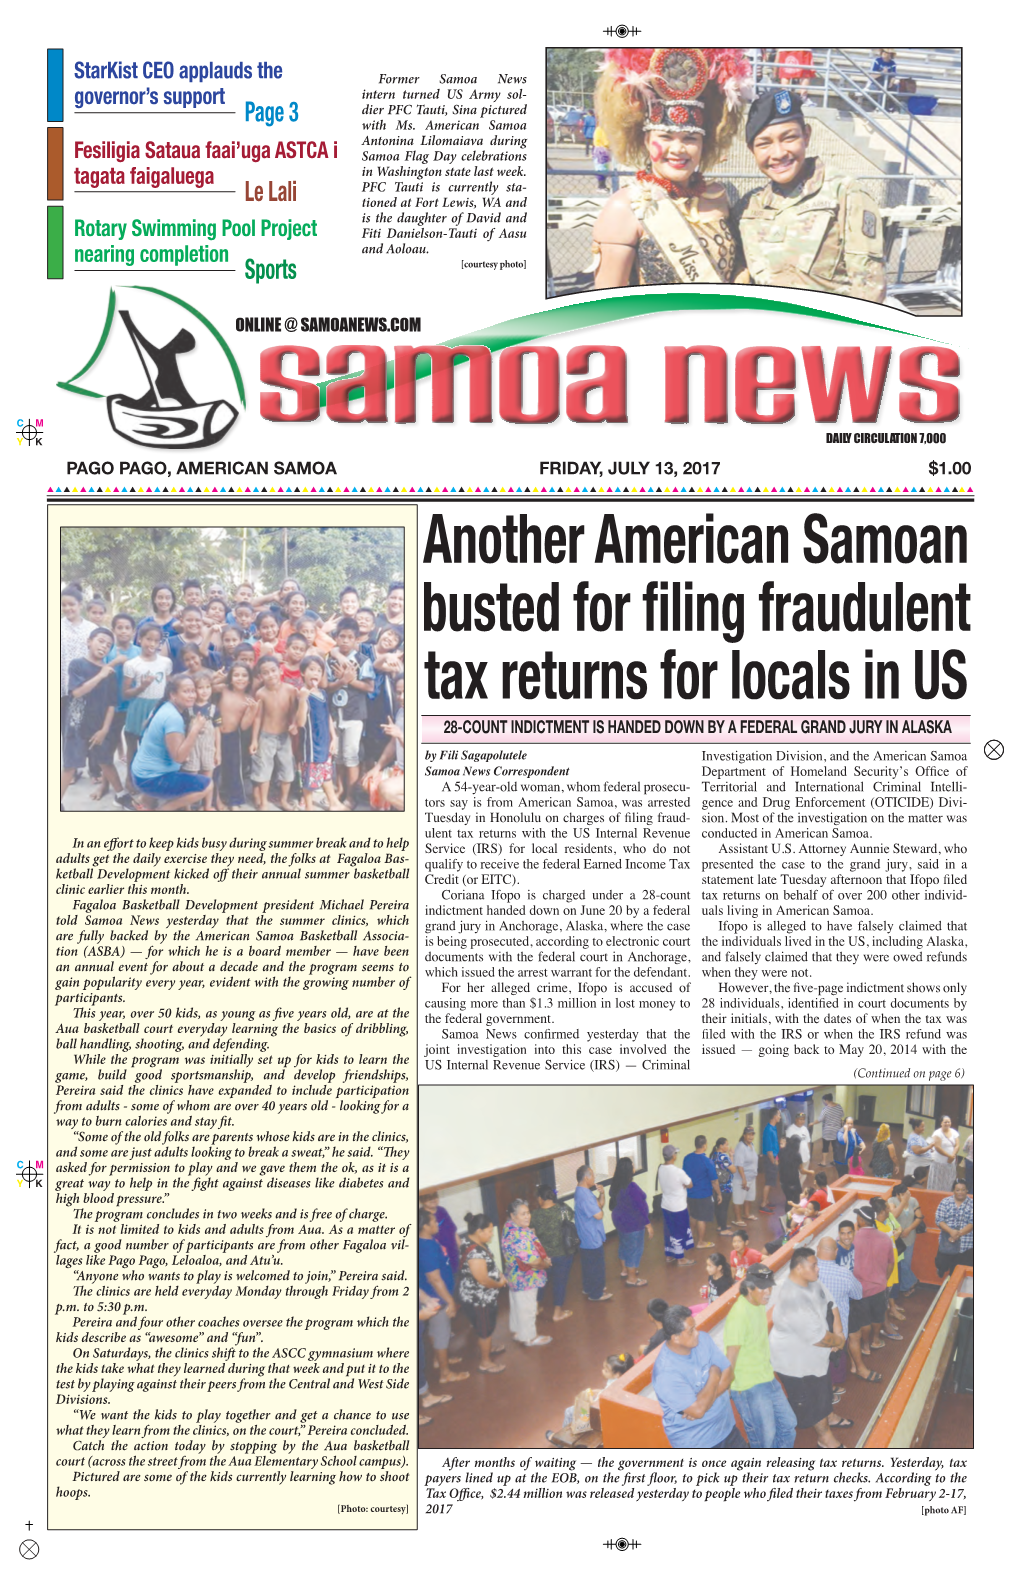 Another American Samoan Busted for Filing Fraudulent Tax Returns For